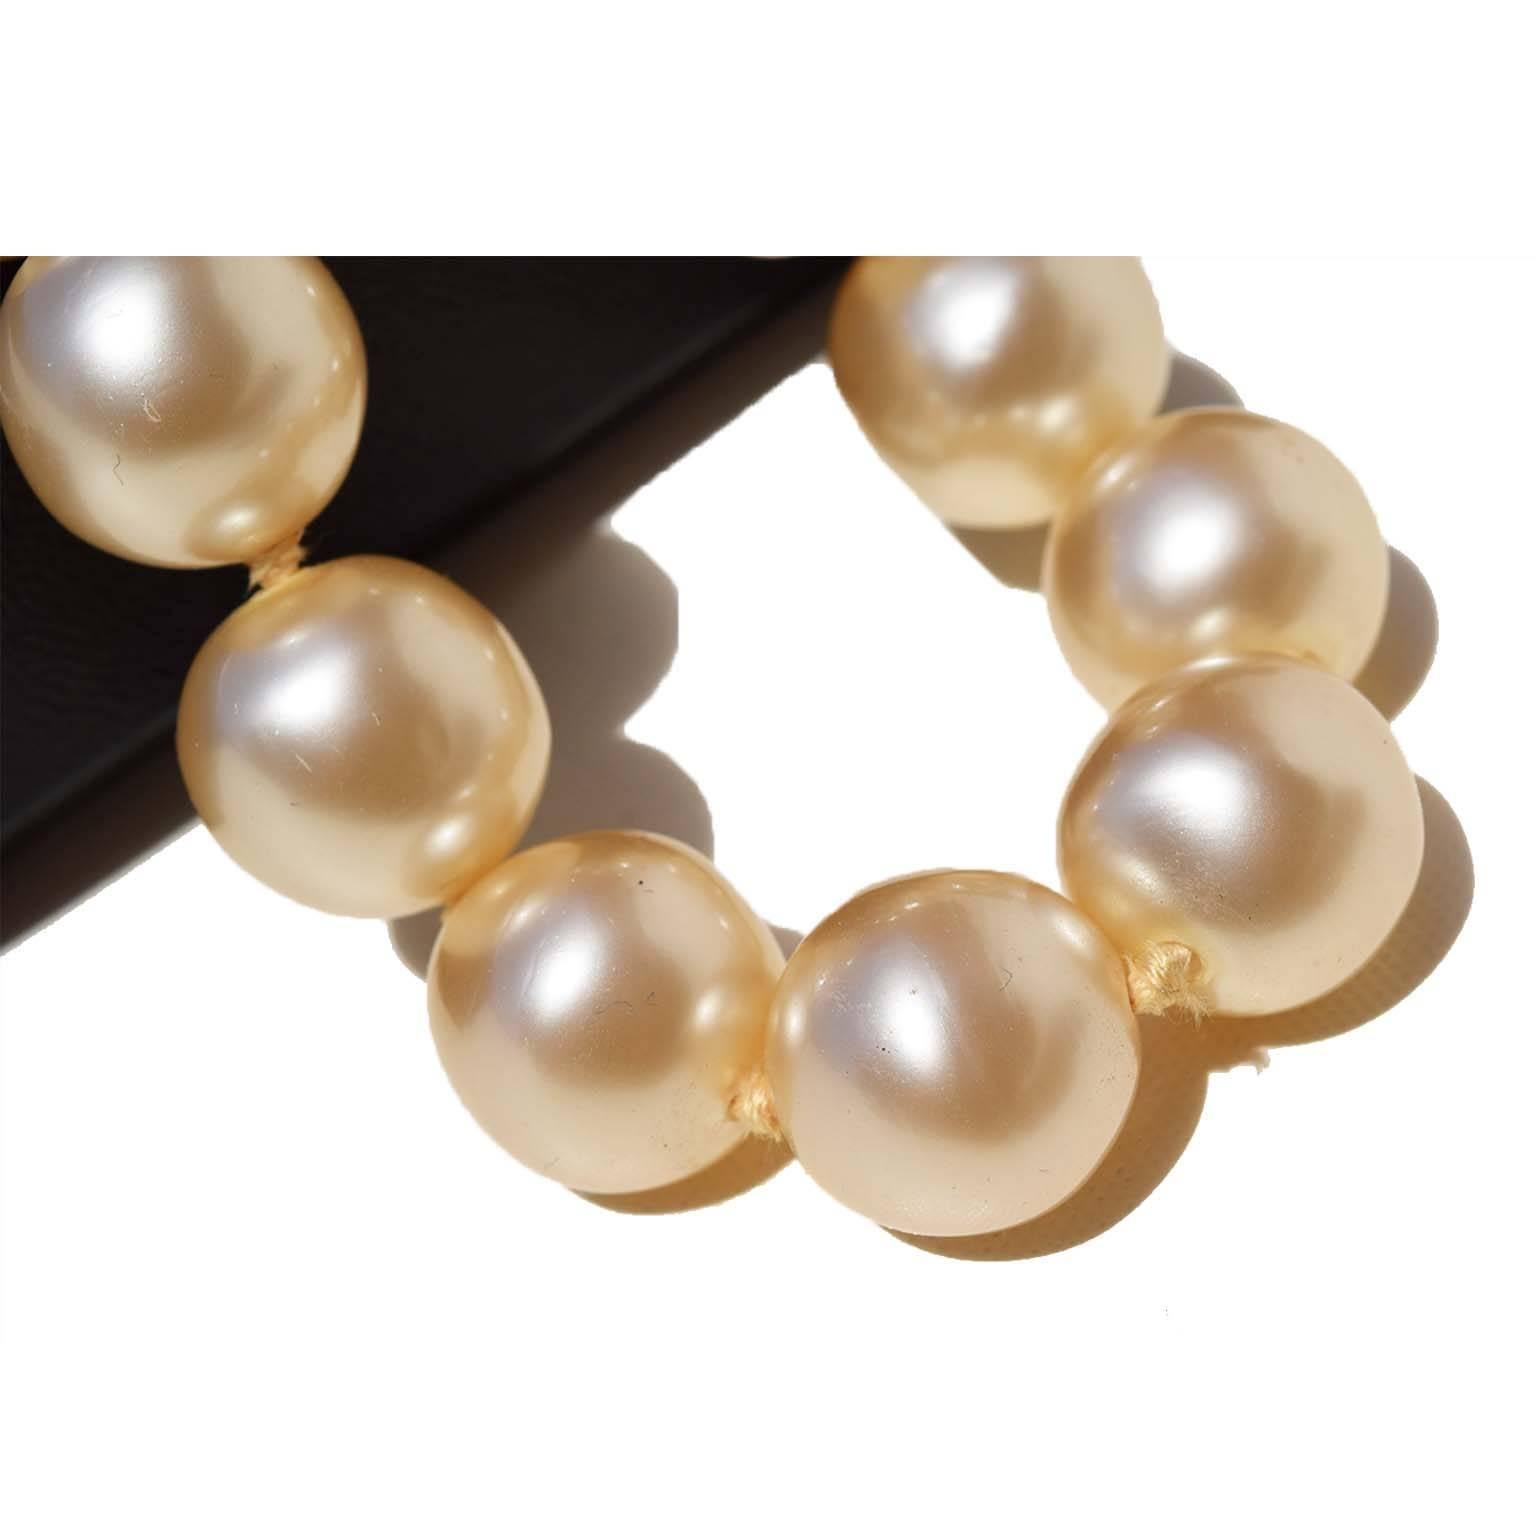 
Chanel vintage large faux pearl choker. Large ivory pearls strung with thick cotton thread. Goldtone harware. Small pearl with CC raised logo on hangtag. Collection 29 (1992), designed by Victoire de Castellane, who was hired by Lagerfeld to